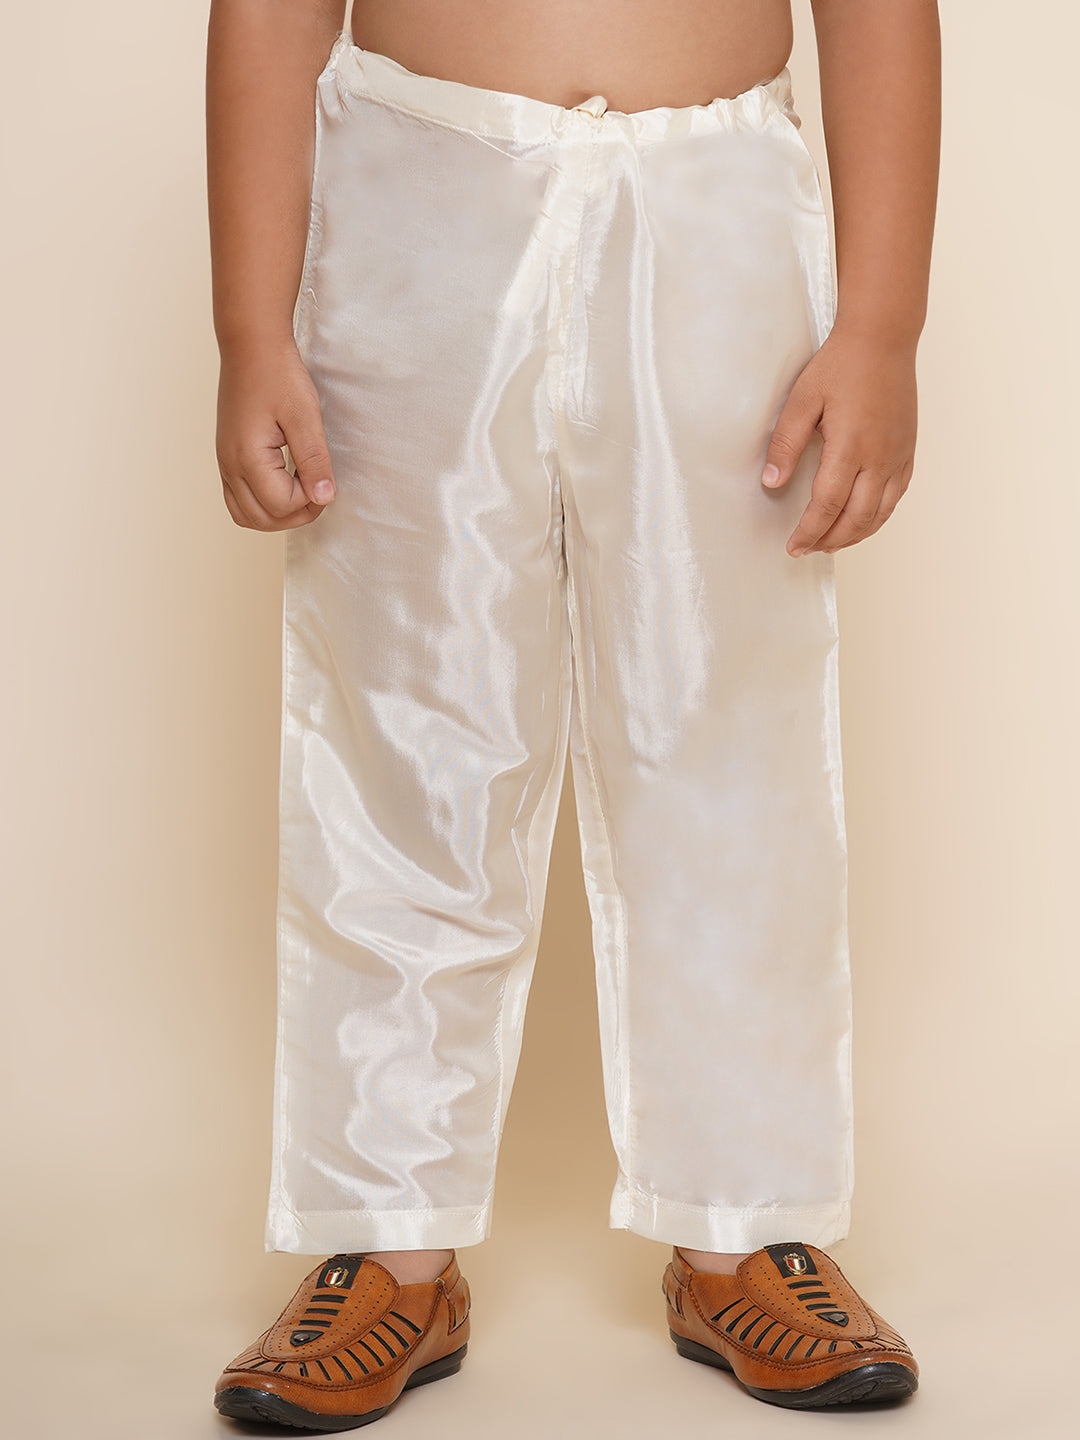 Buy Kids White Pants by ALMIRAH at Ogaan Market Online Shopping Site